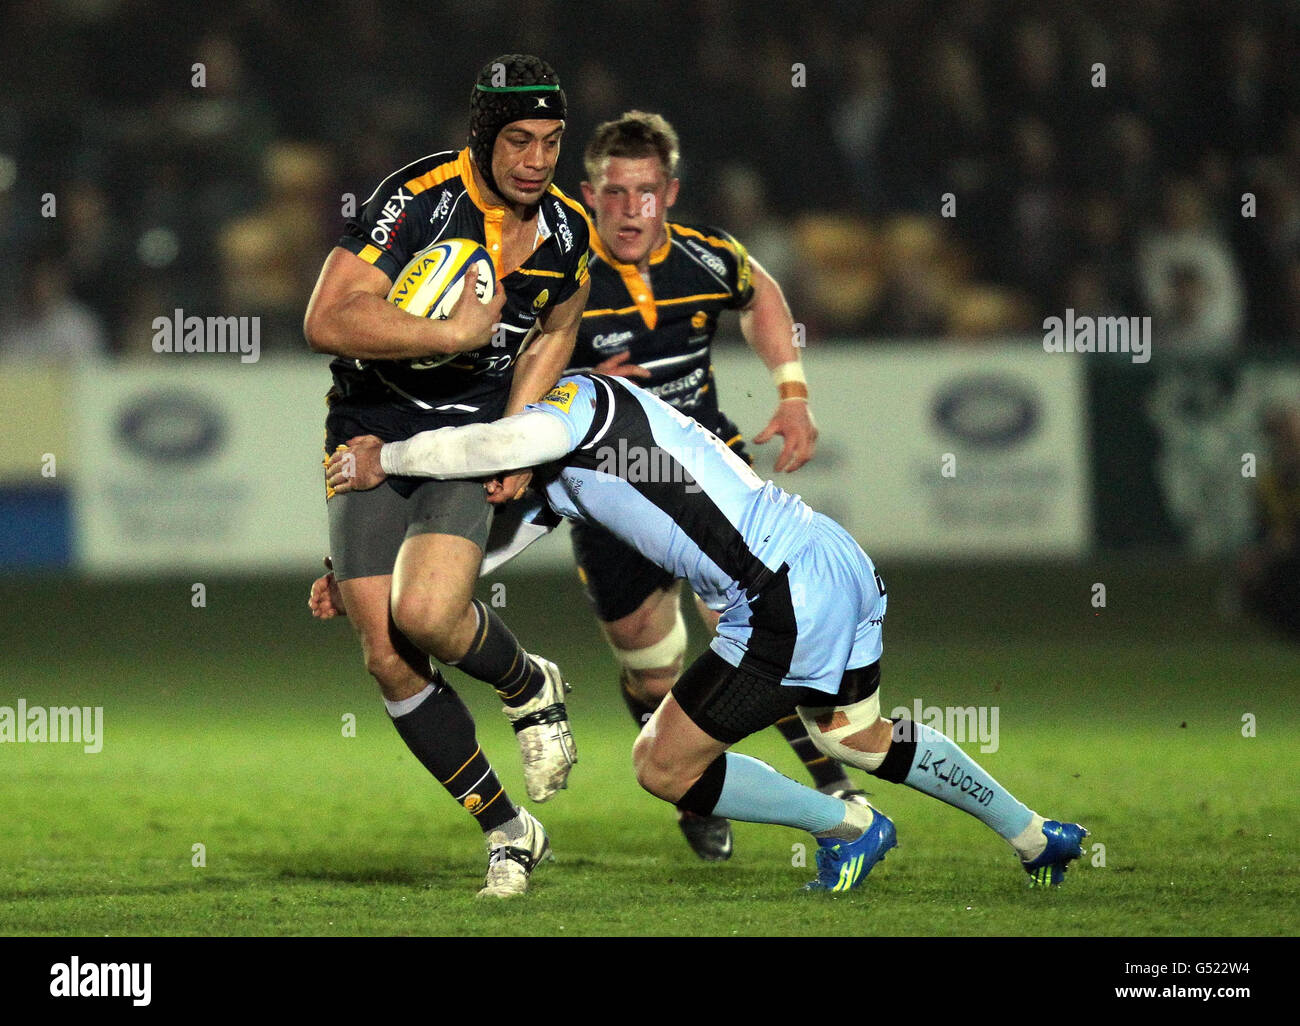 Rugby Union - Aviva Premiership - Worcester Warriors v Newcastle Falcons - Sixways Stadium. Worcester's Dale Rasmussen is tackled by Newcastle's Jeremy Manning during the Aviva Premiership match at Sixways Stadium, Worcester. Stock Photo